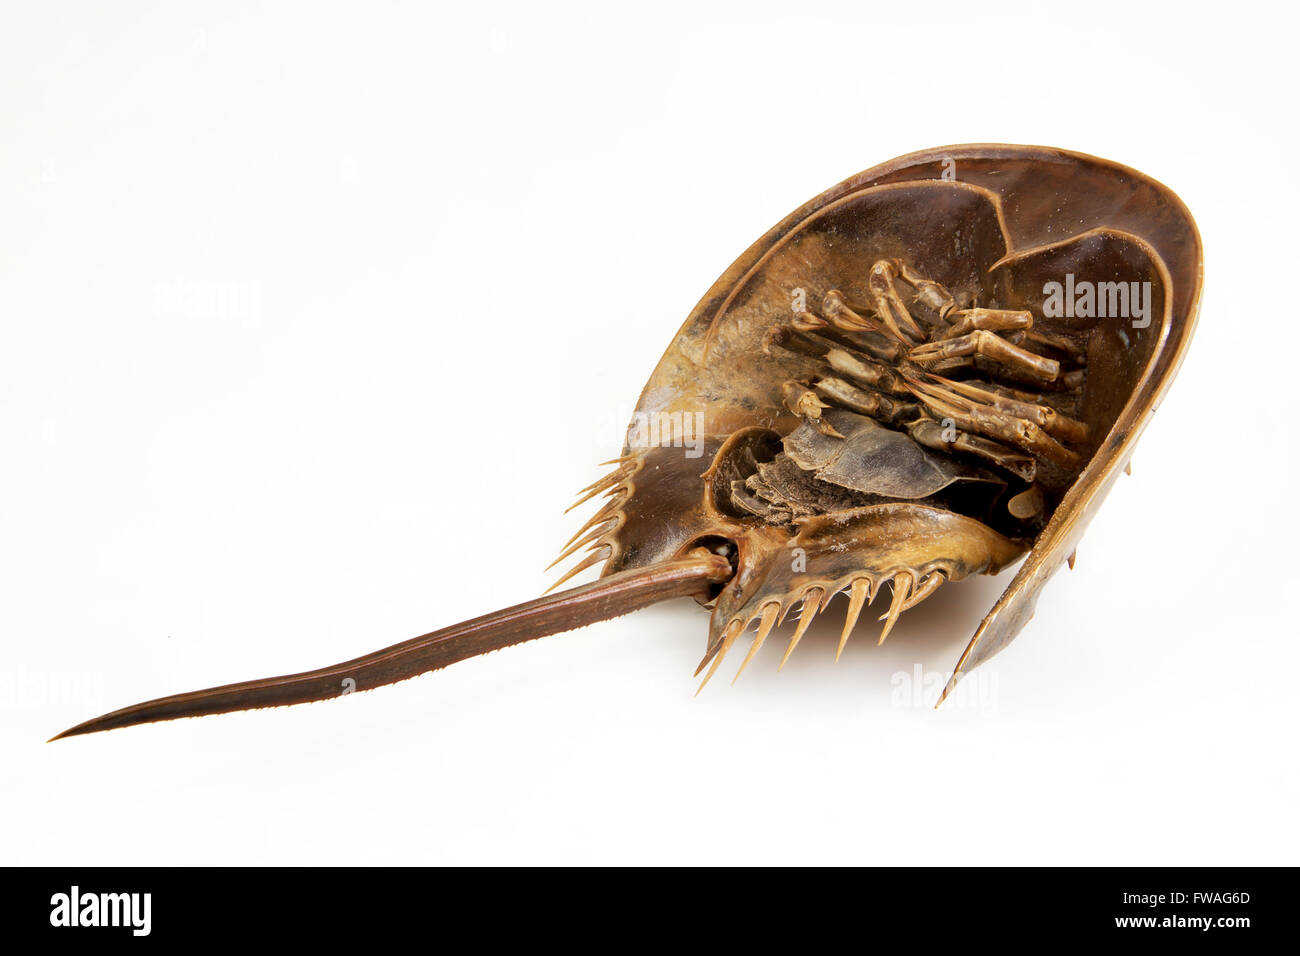 a large marine arthropod with a domed horseshoe-shaped shell, a long tail-spine, and ten legs. on isolated Objects With Clipping Stock Photo